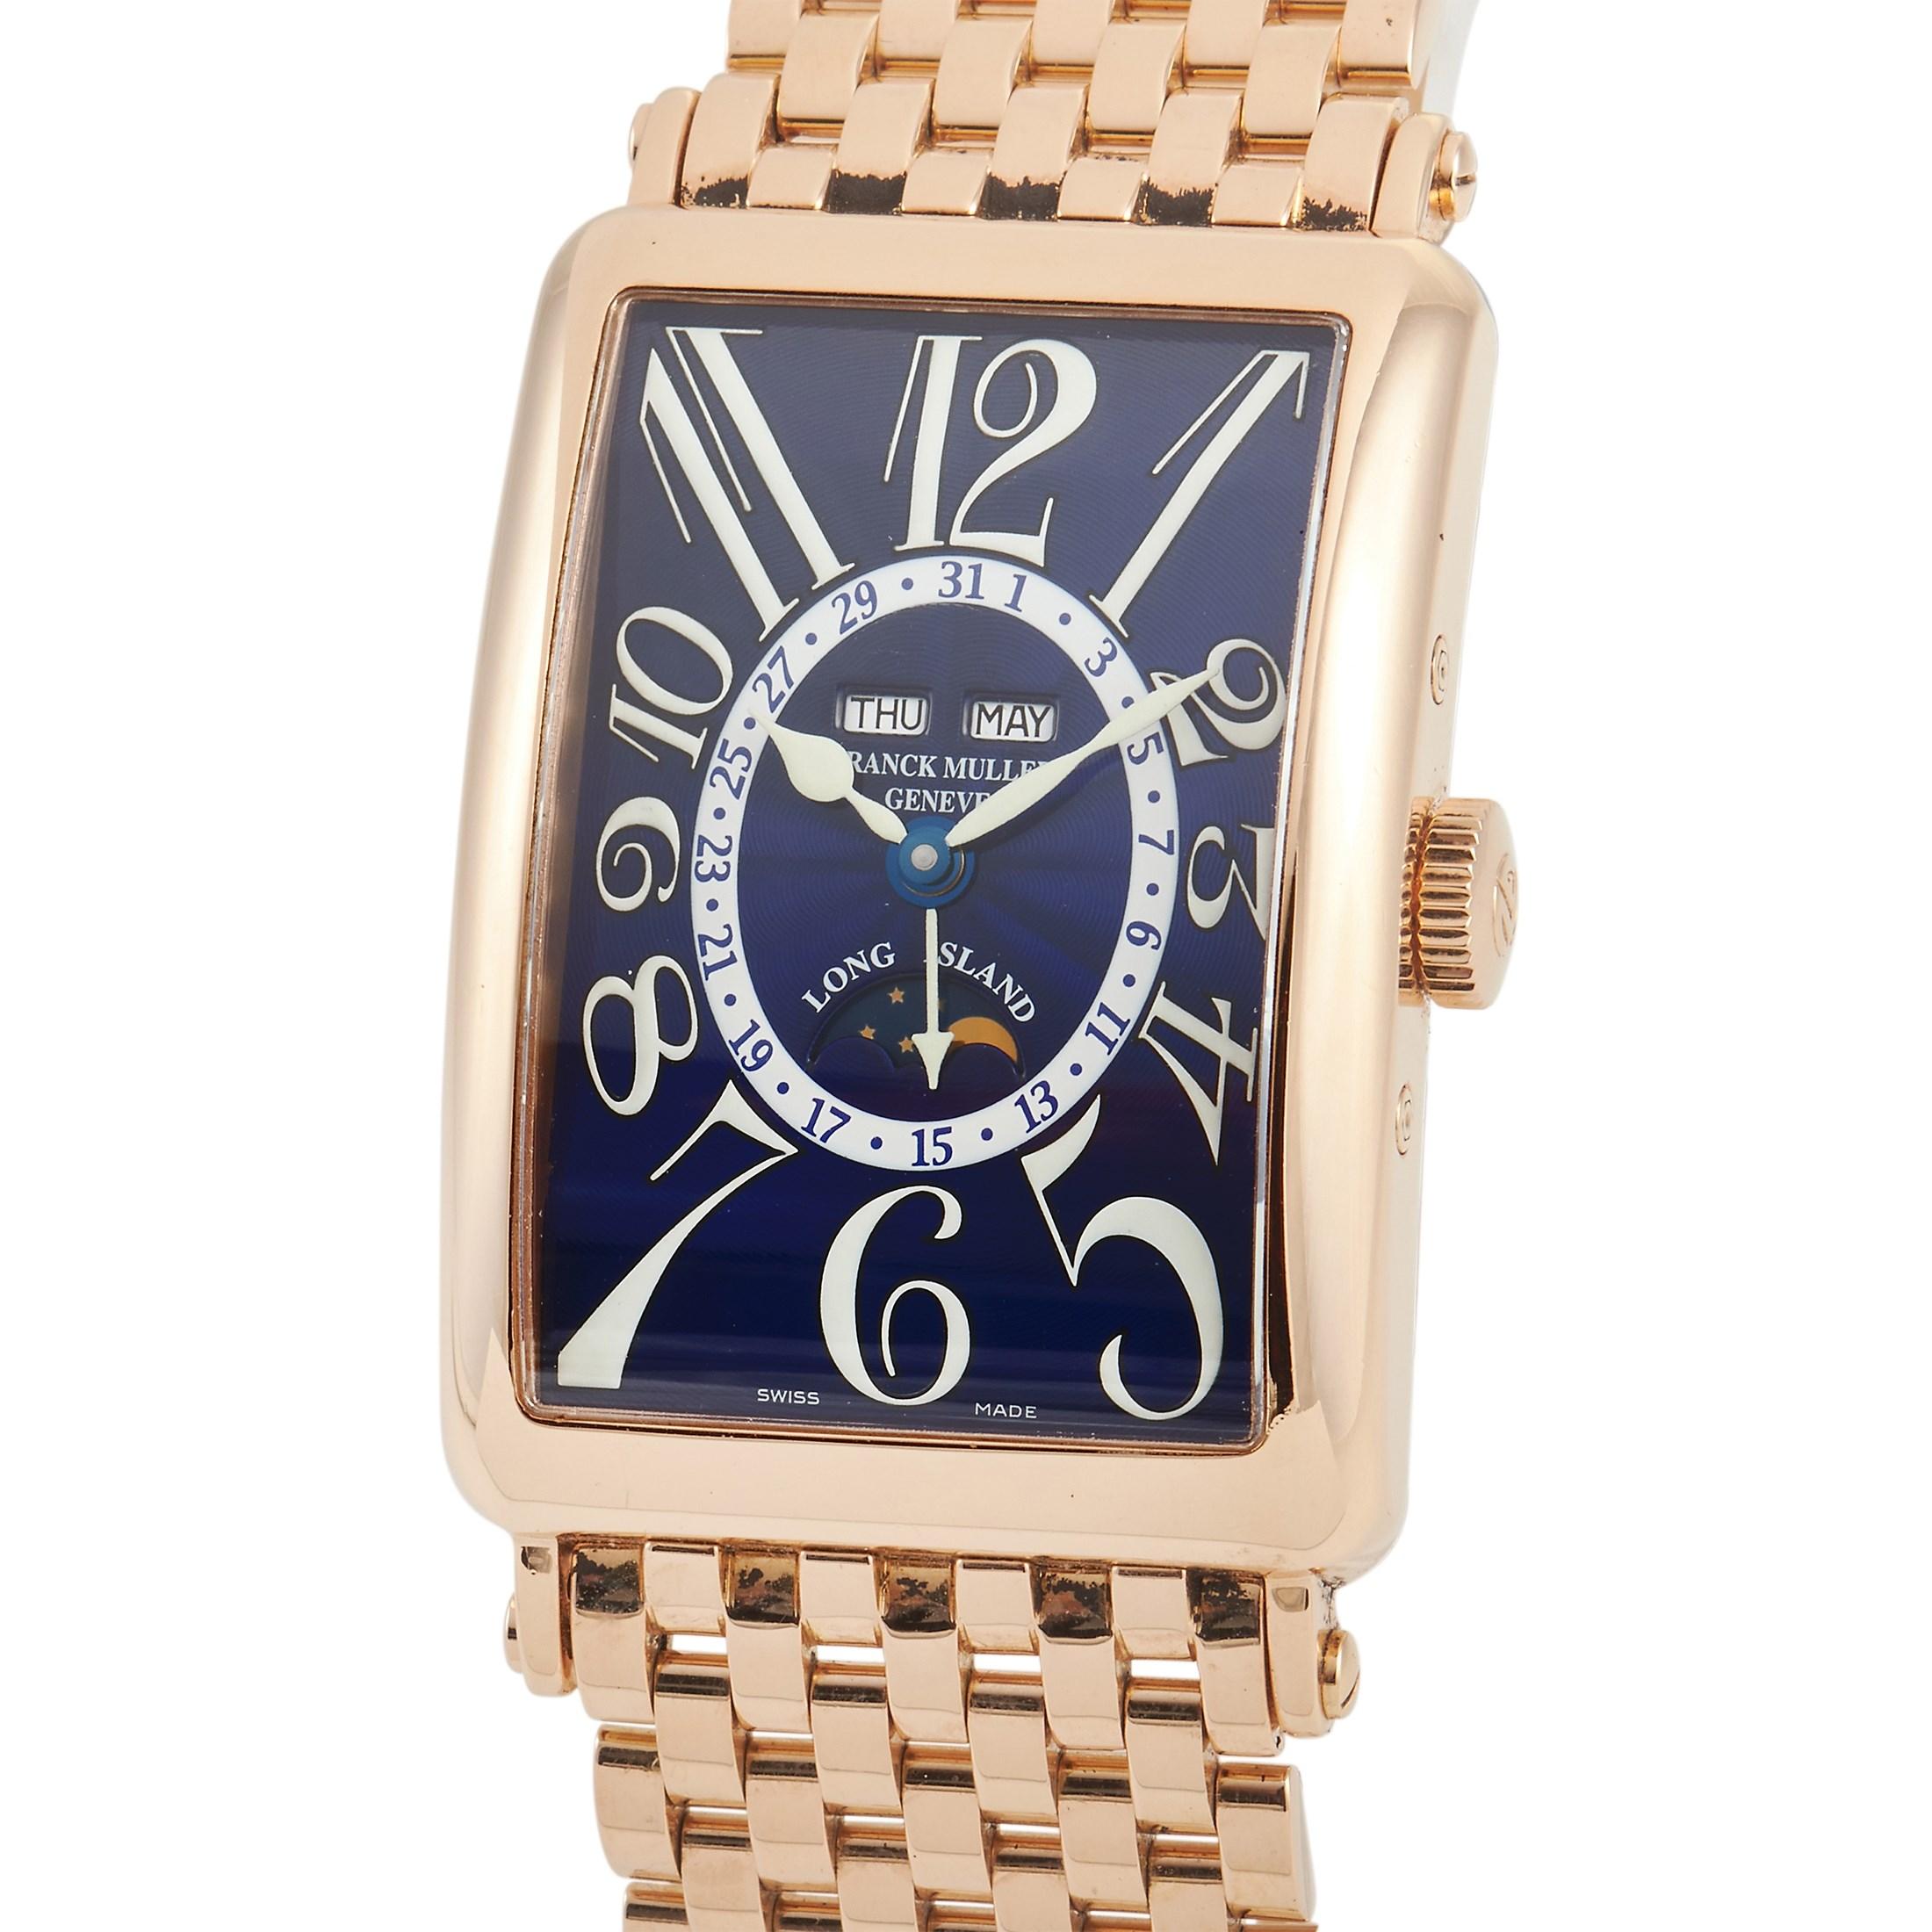 The Franck Muller Long Island Master Calendar Watch, reference number 1200-MC-L, is a timepiece that is unlike any other. 

The beauty of this piece begins with the rectangular case, which measures 32 x 45 mm and is made from 18K Yellow Gold. A